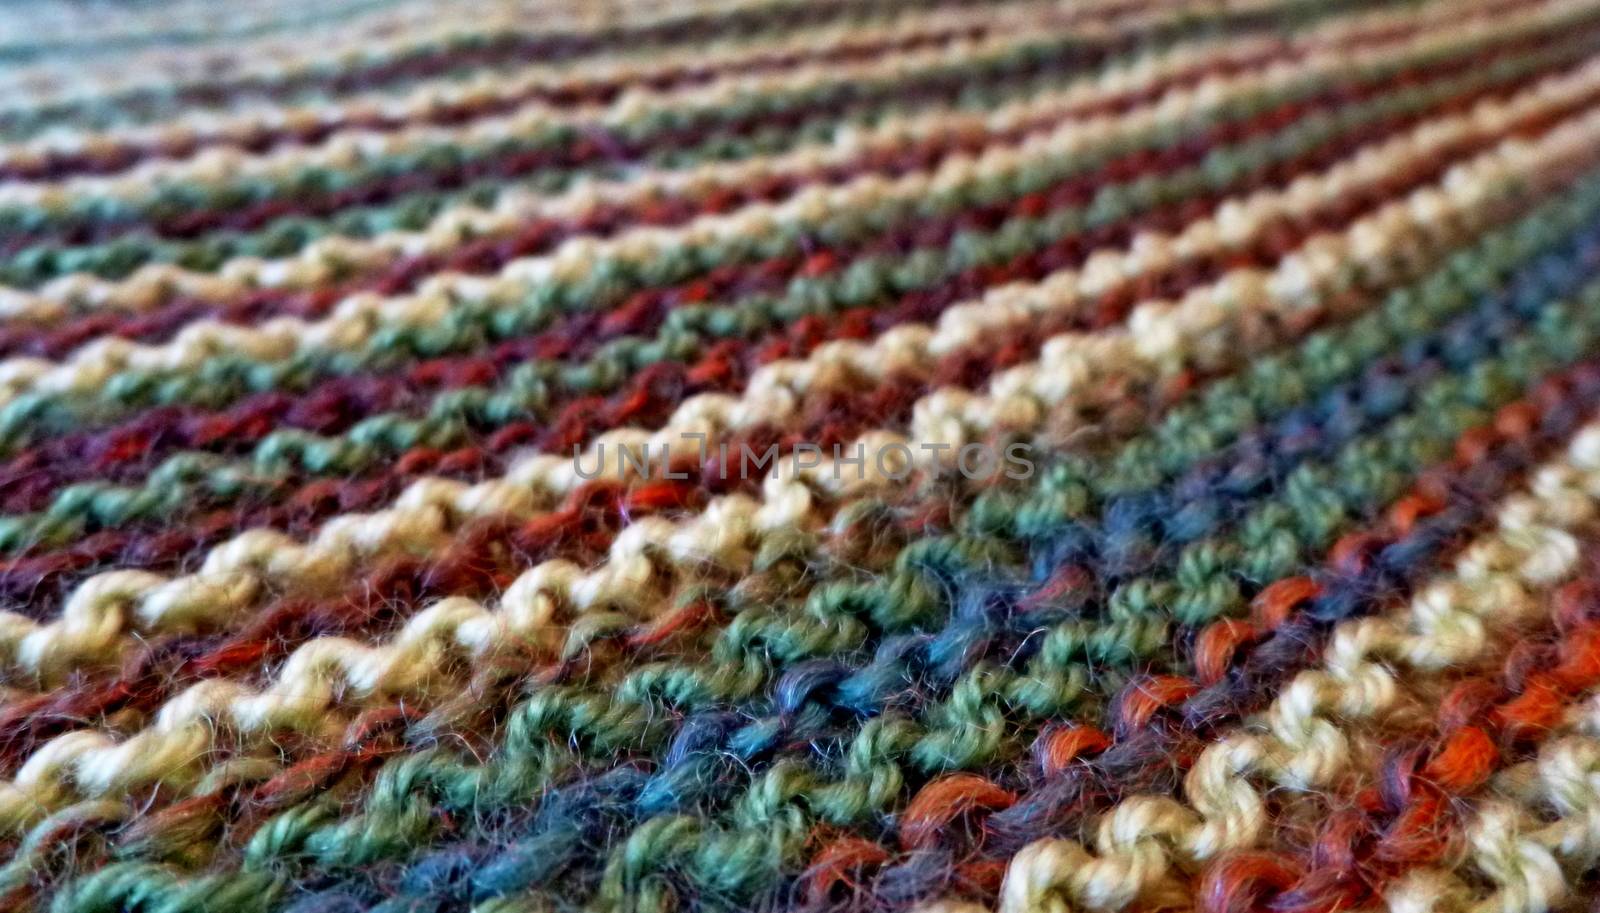 Knitted multicolored fabric texture. Background image. Hobbies, leisure, crafts. Diagonal arrangement of the pattern